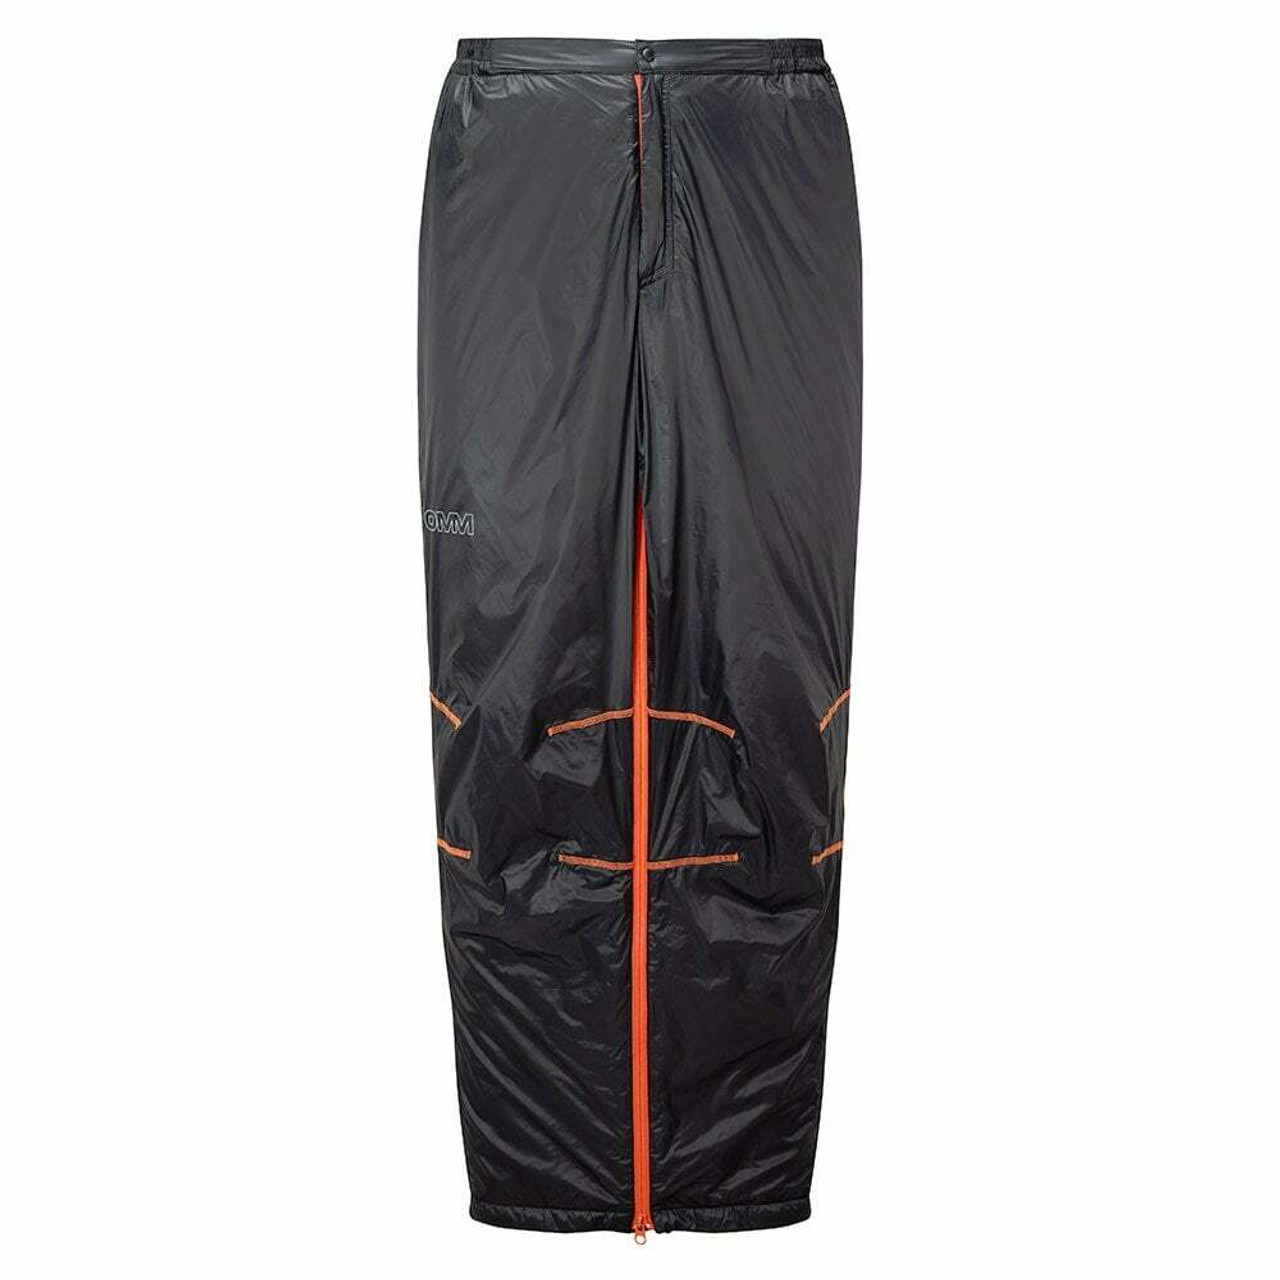 OMM Mens Mountain Raid Pants Trousers Bottoms Black Sports Outdoors Warm Water 